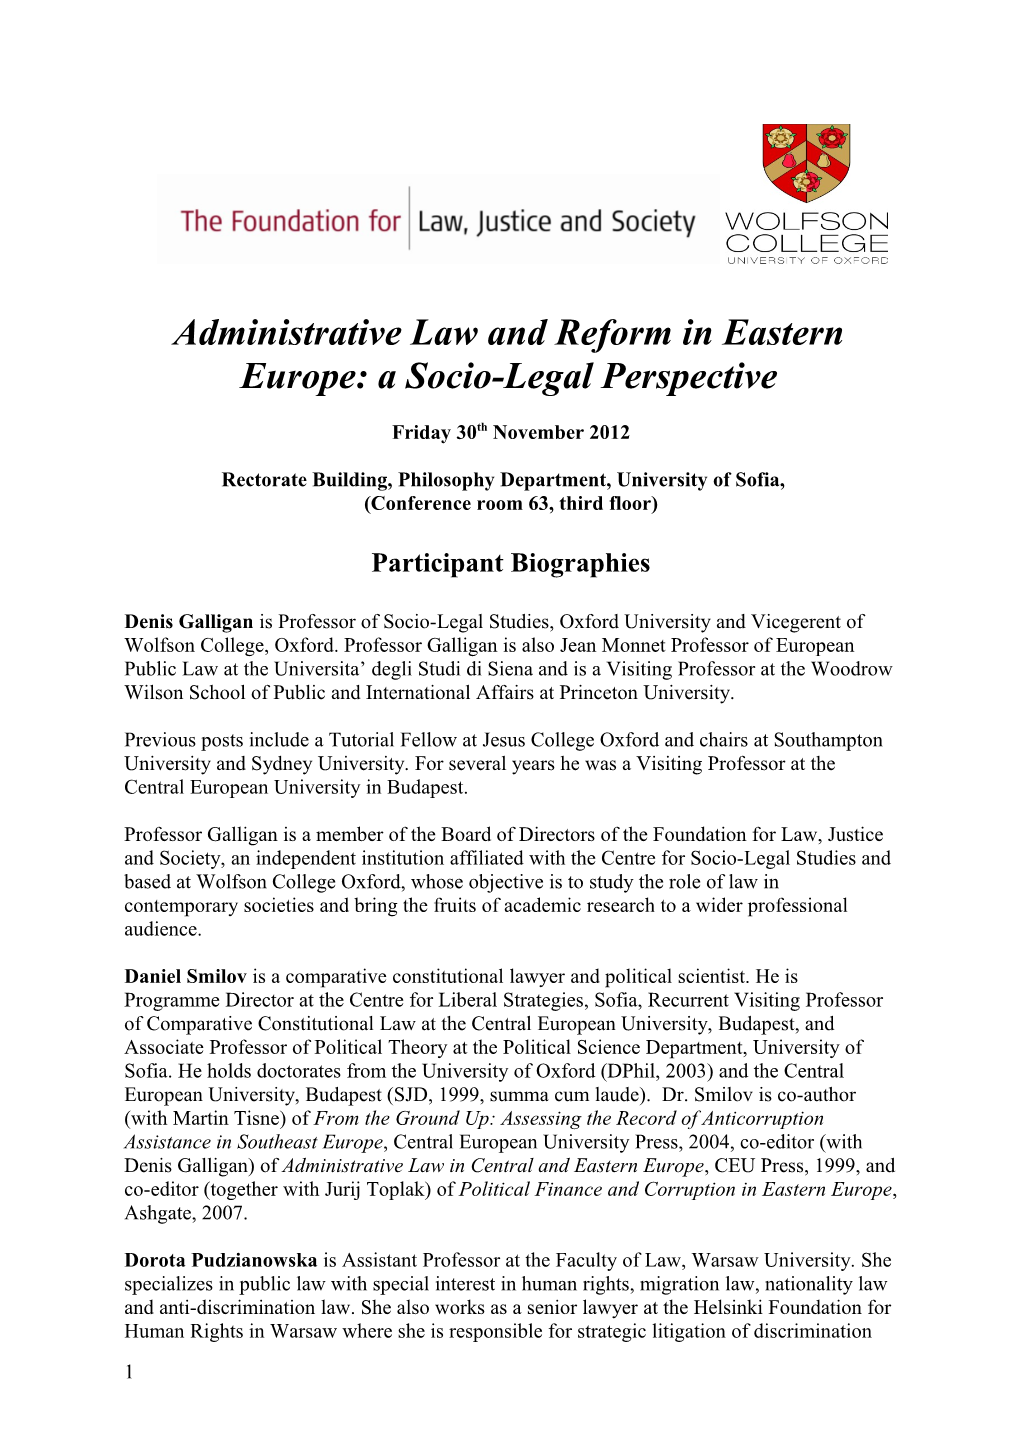 Administrative Law and Reform in Eastern Europe: a Socio-Legal Perspective